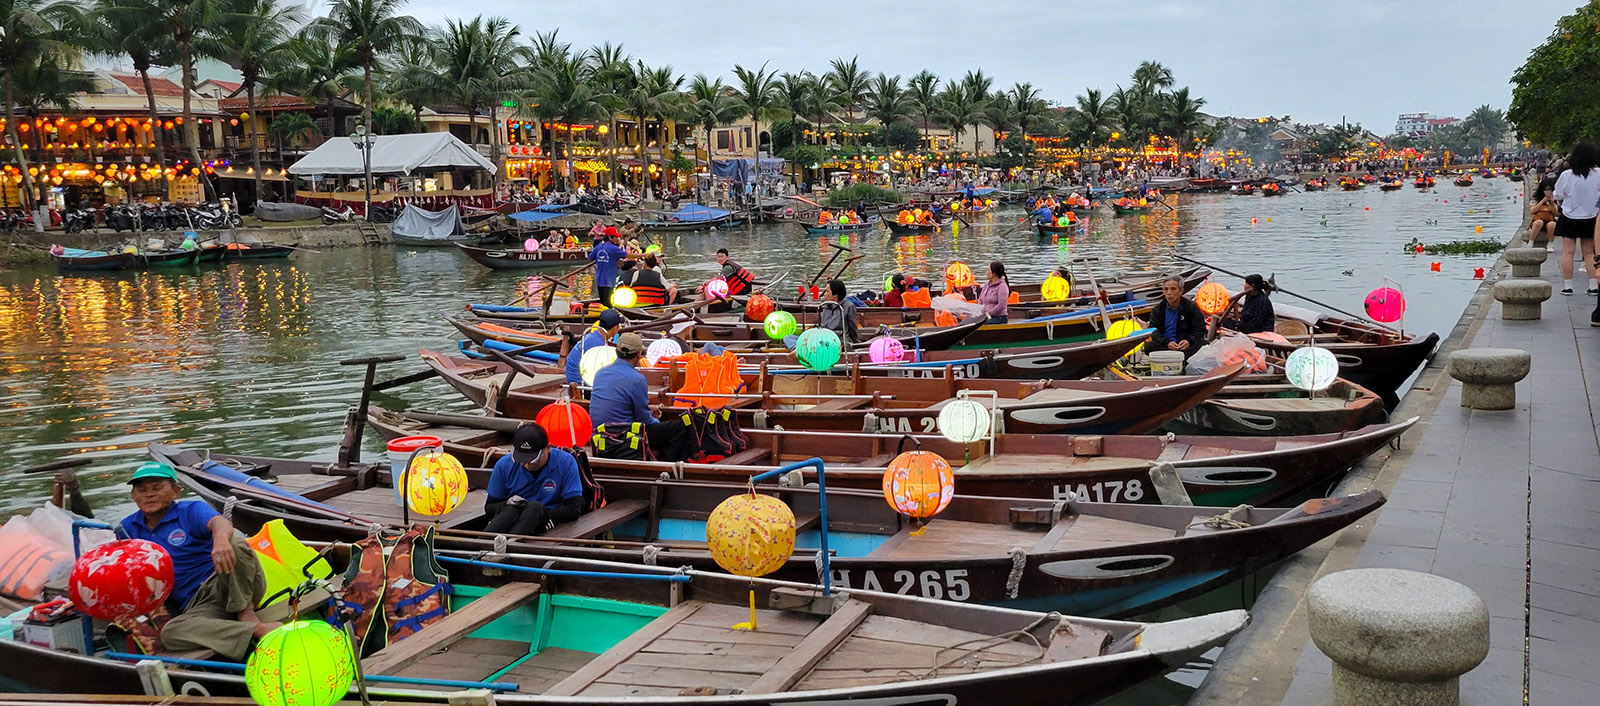 Boats lined up on the river in Hoi An as dusk approaches.